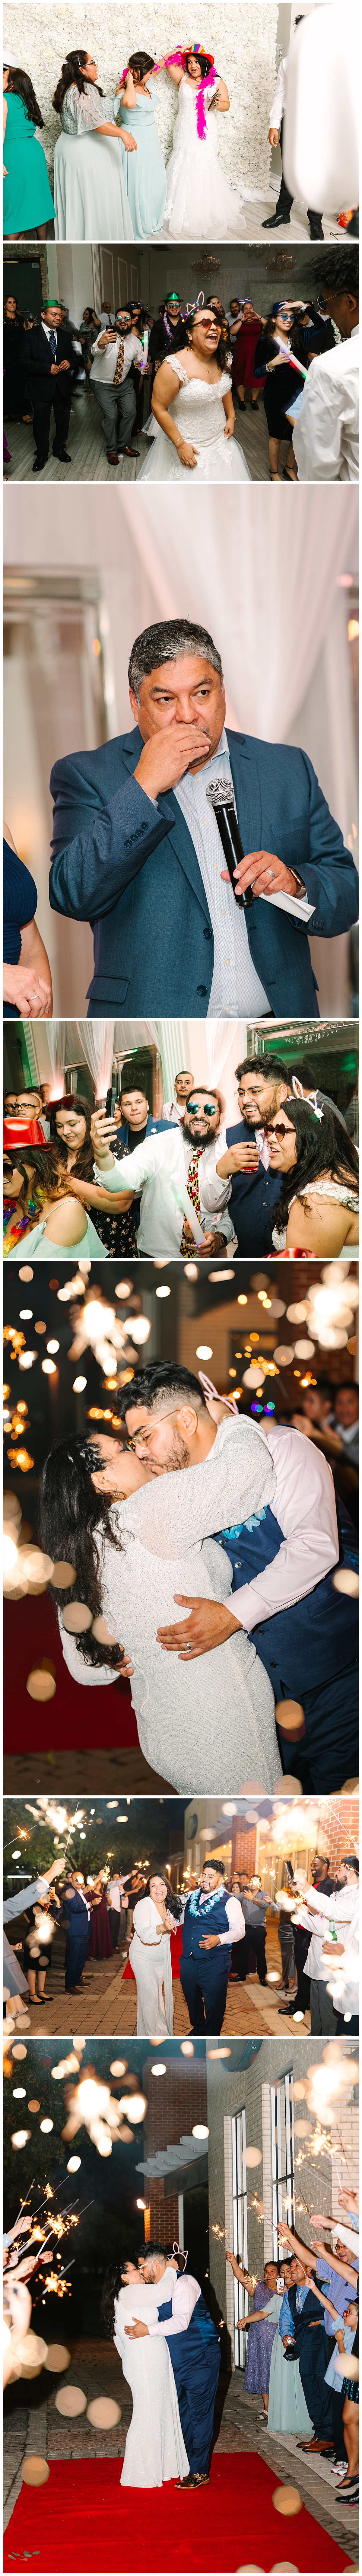 A collage of photos of newlyweds at their Crystal Ballroom reception in St. Augustine followed by photos of their exit surrounded by sparklers.